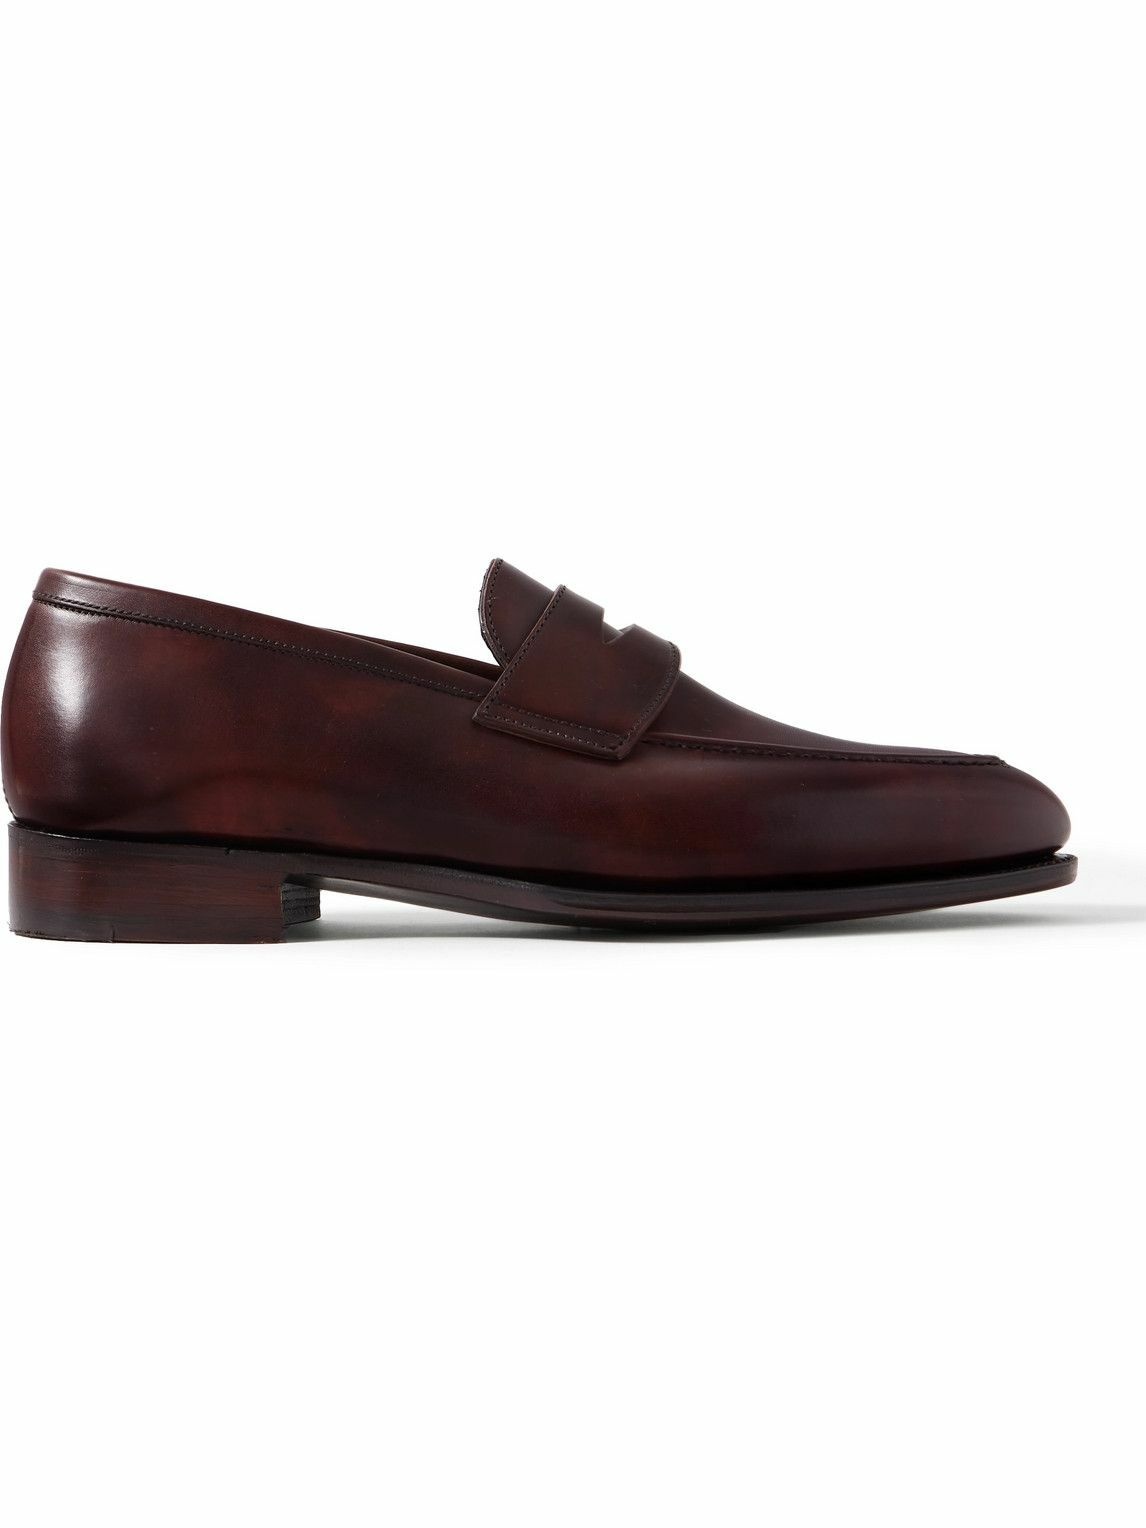 George Cleverley - Bradley II Leather Penny Loafers - Brown George ...